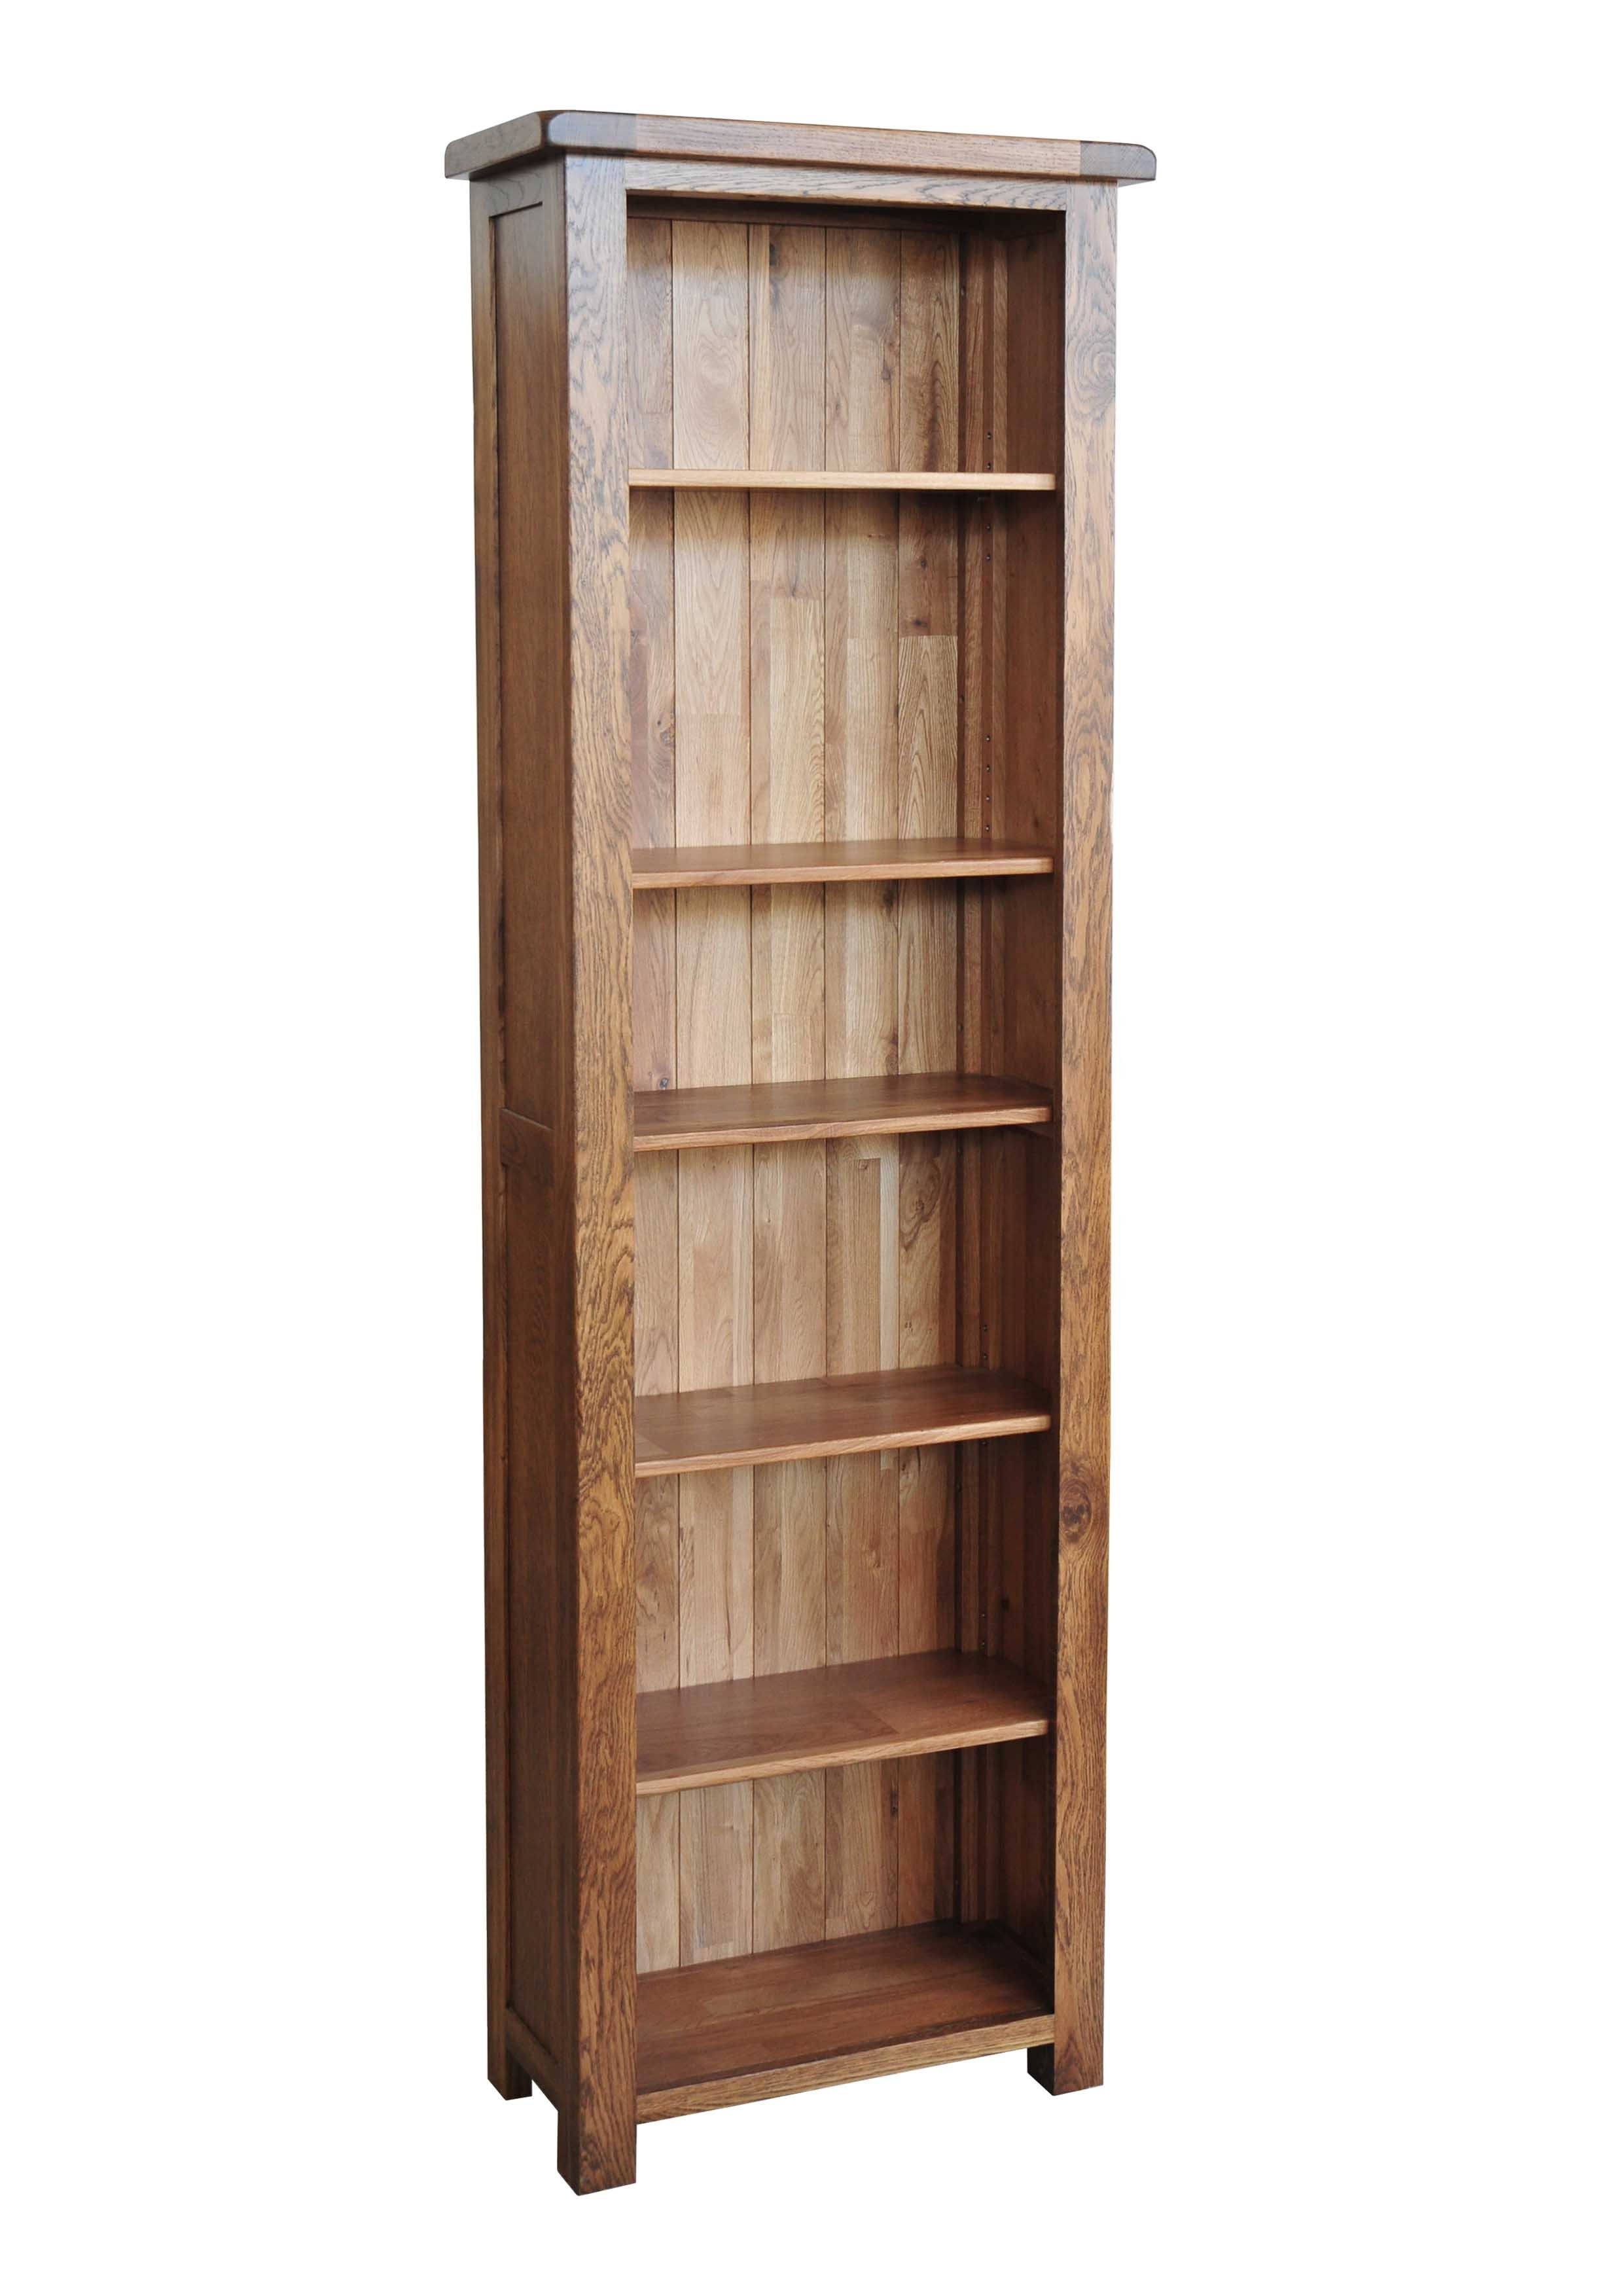 Widely Used Bookcases Ideas: Solid Wood Bookcases, Birch Bookcases, Unfinished For Slim Bookcases (View 9 of 15)